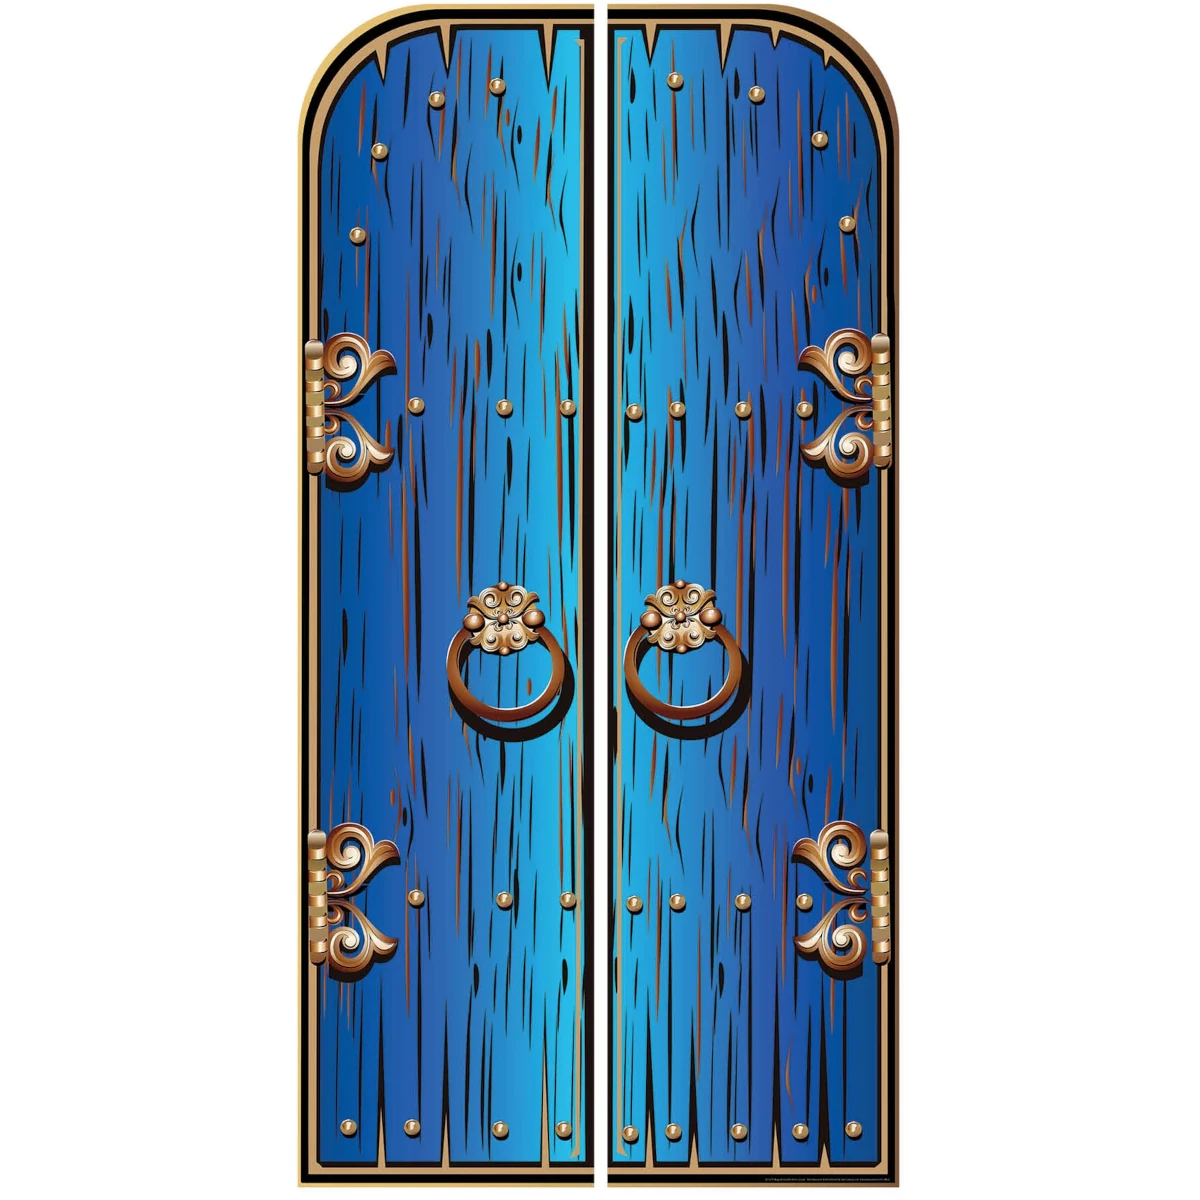 SC1575 Blue Fantasy Magical Fairy Double Doors Large Cardboard Cutout Standee Front